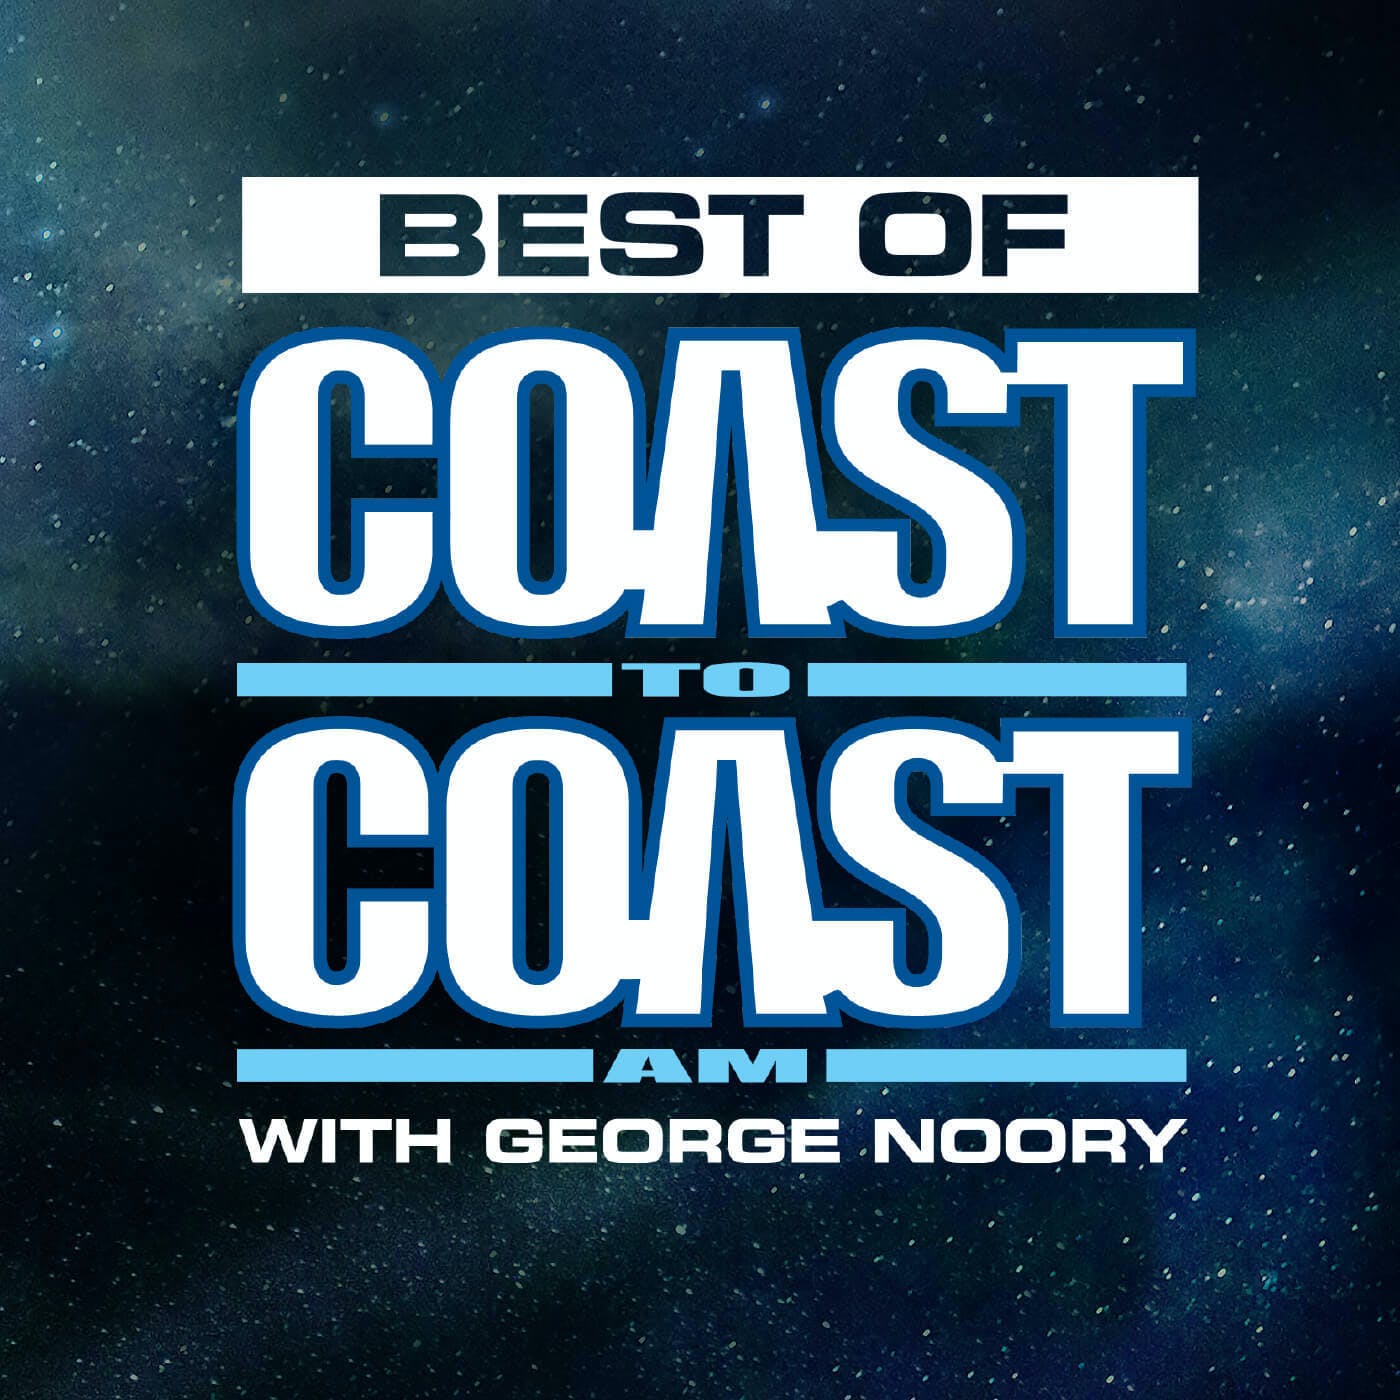 Astrology Predictions - Best of Coast to Coast AM - 4/8/21